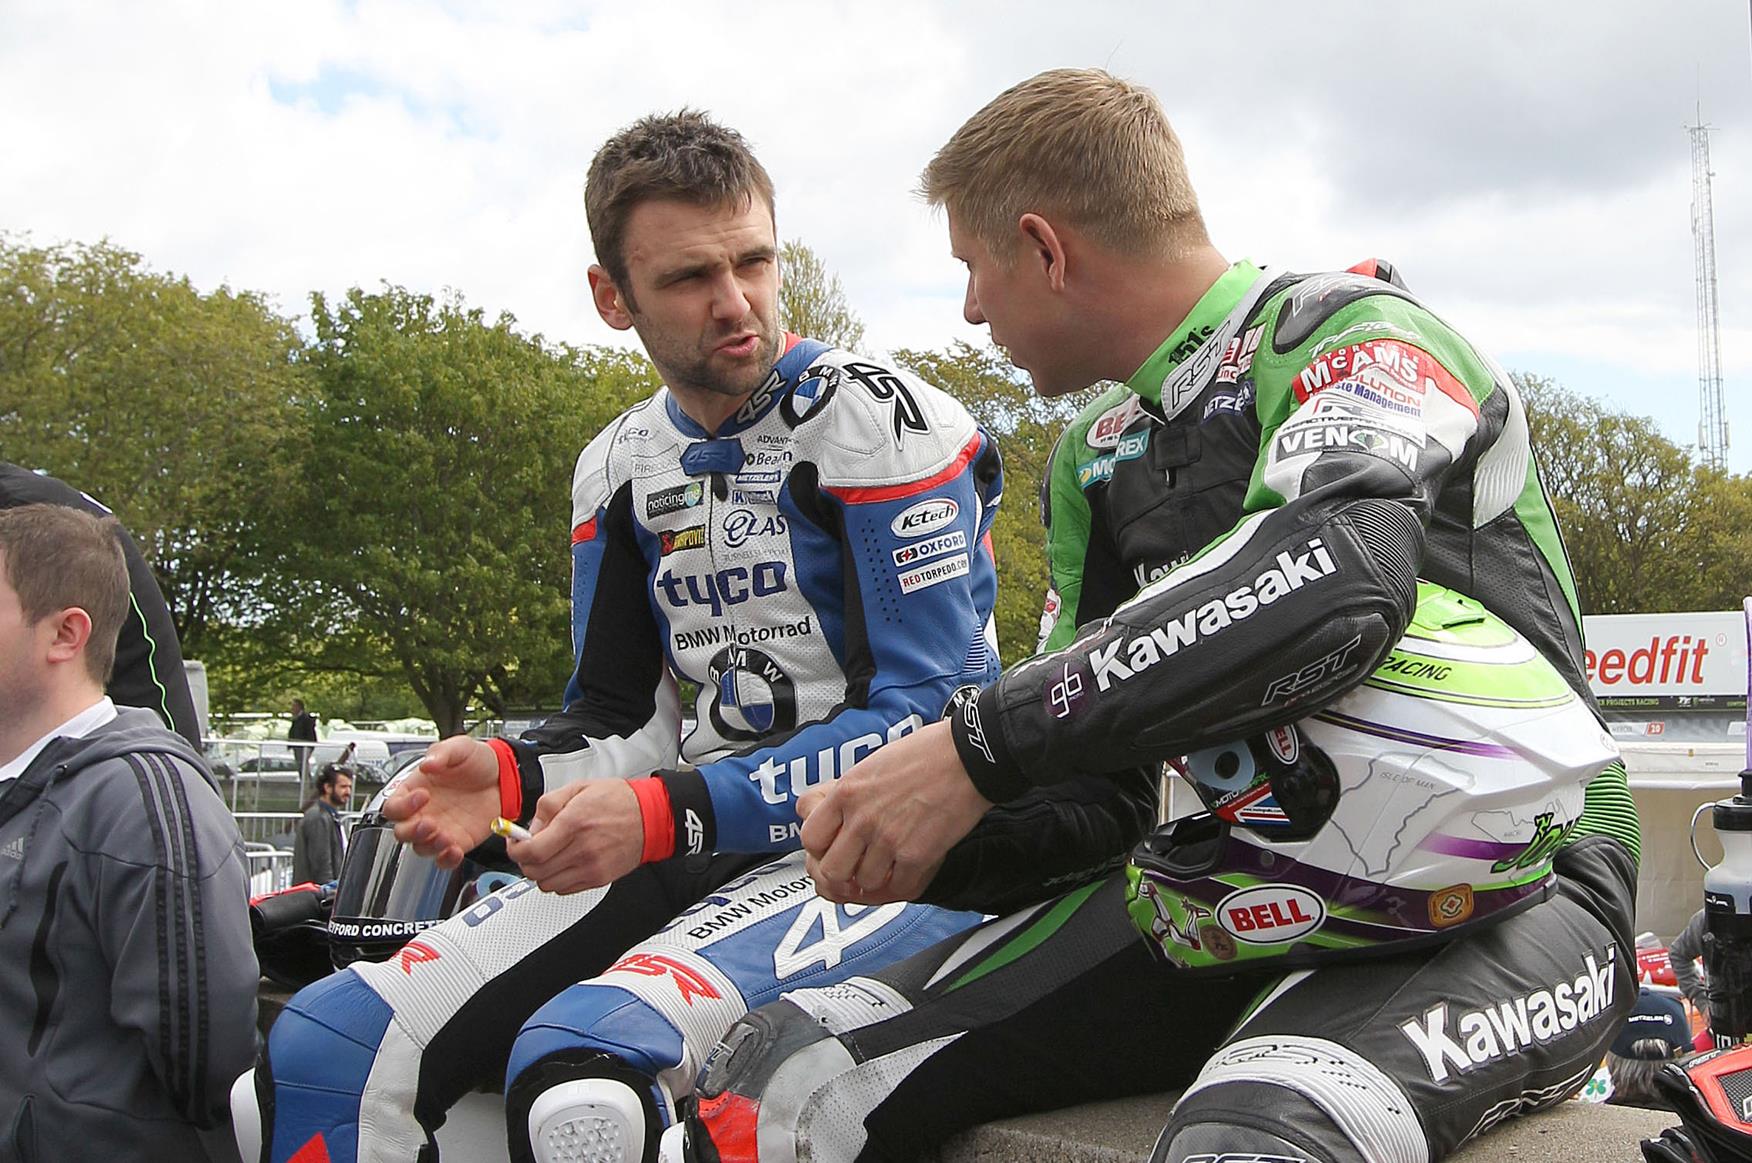 William Dunlop out of TT | MCN